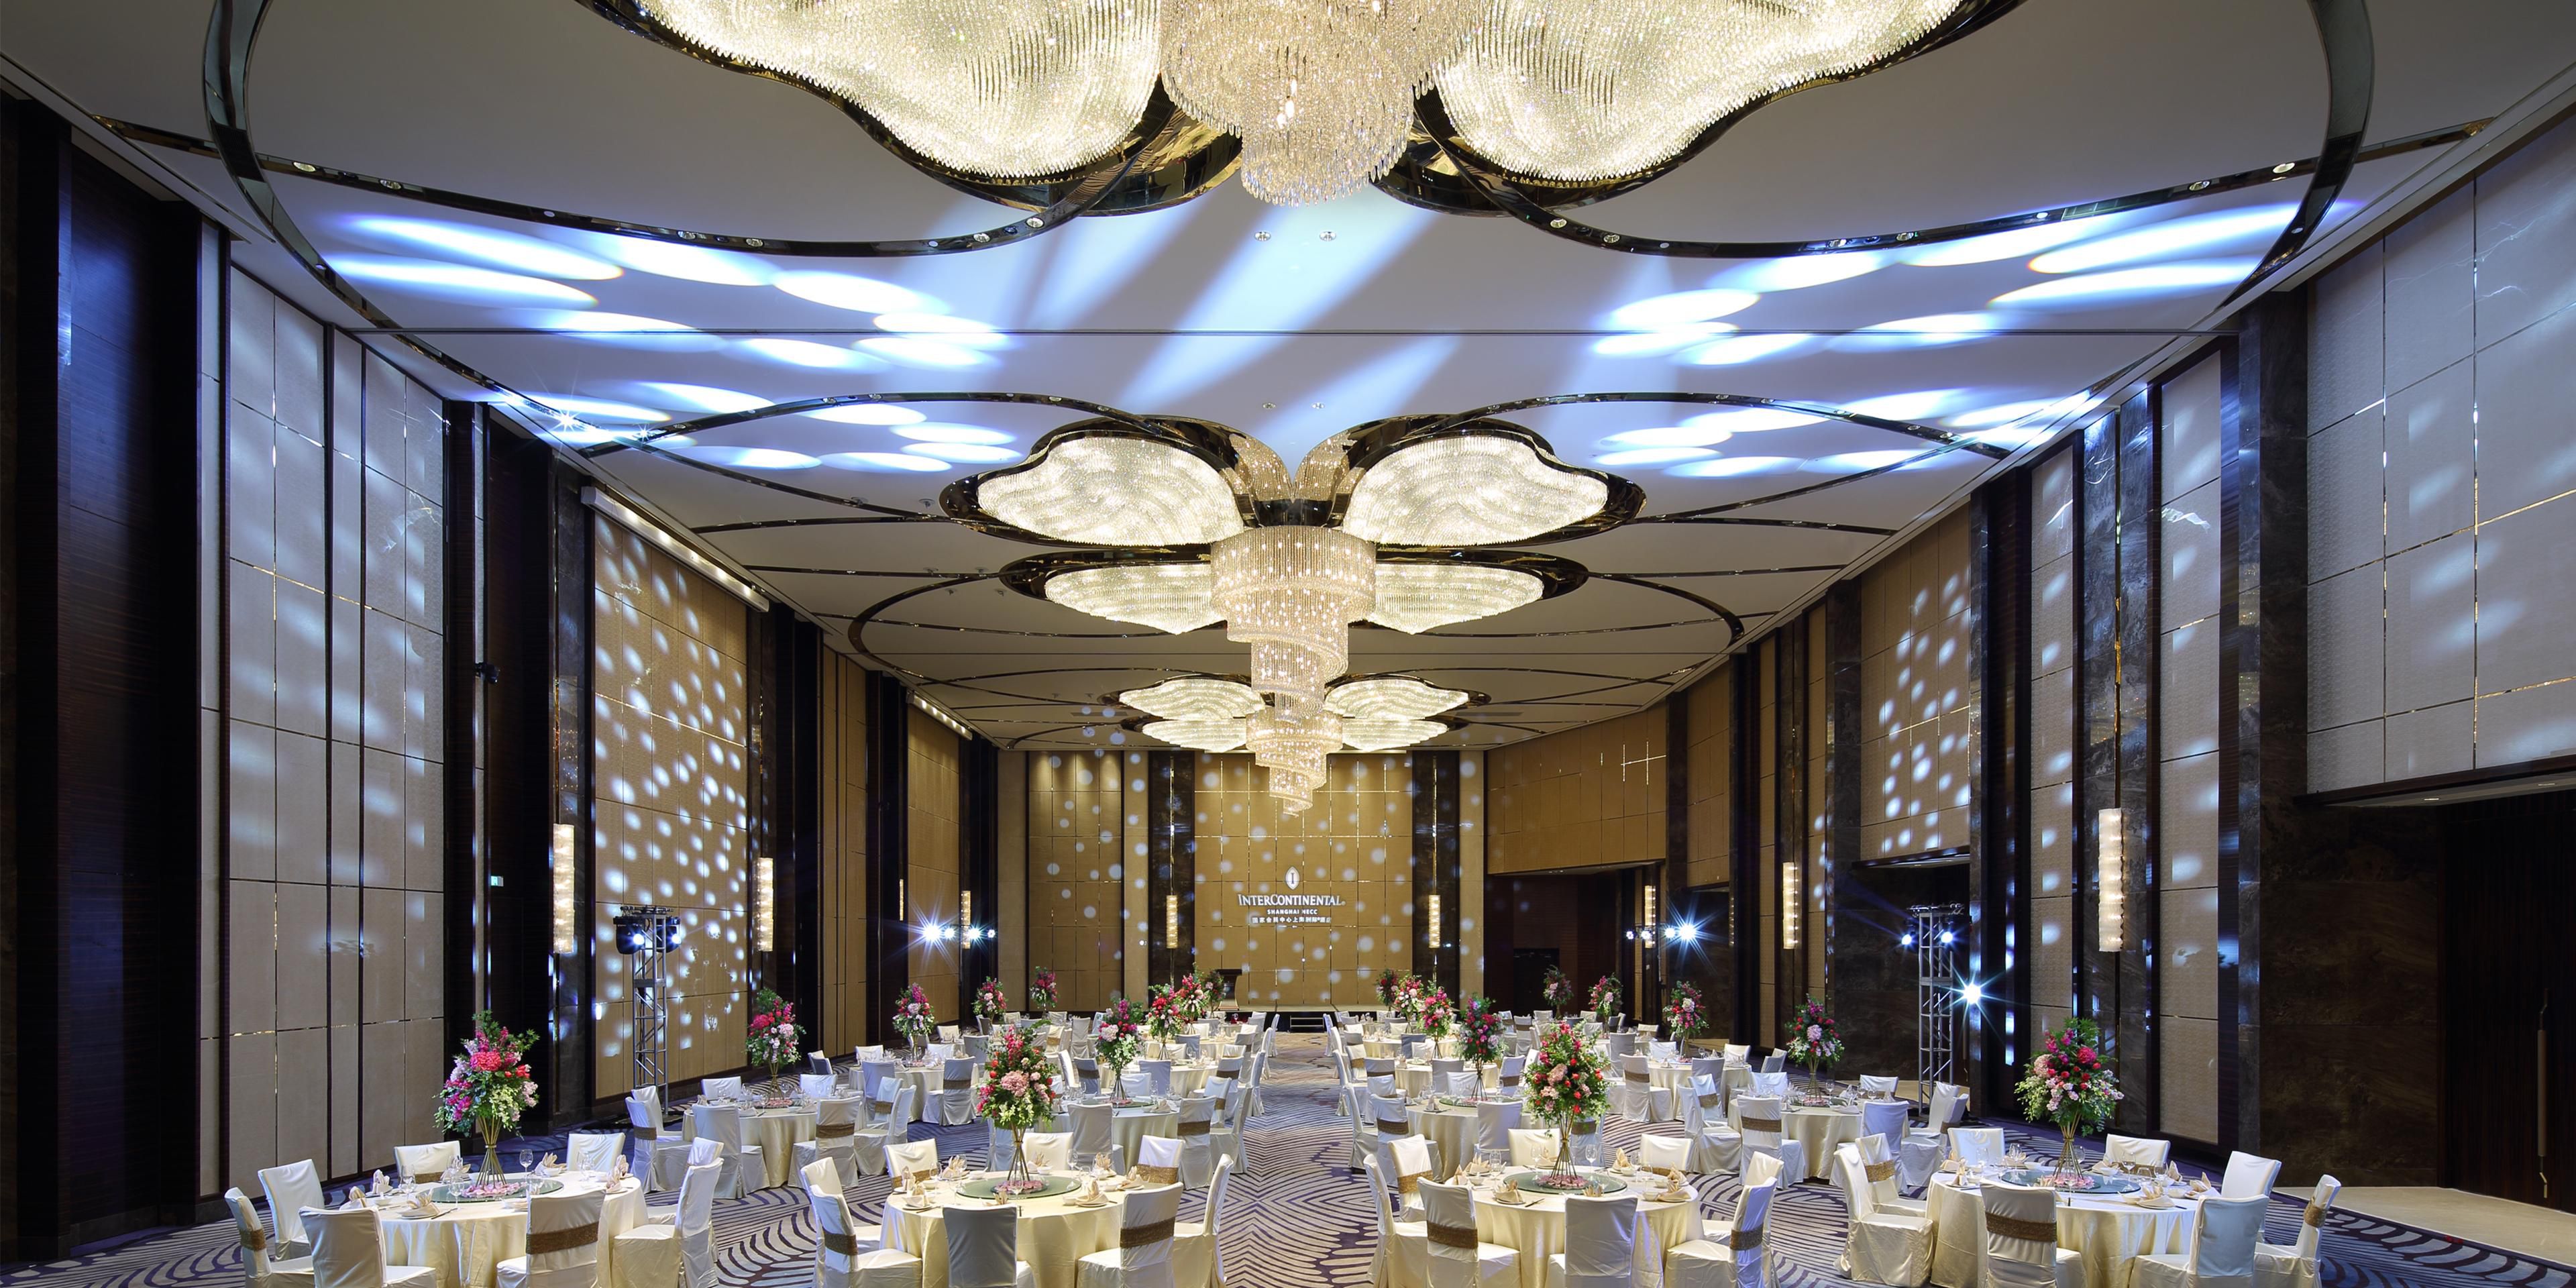 The spectacular Grand Ballroom spans 900 sqm, which can be sub-divided into three parts，its nine-meter-high ceilings feature three dazzling crystal chandeliers, each shaped like an auspicious four-leaf clover. The hotel’s experienced team of wedding planners is on hand to create truly memorable experiences for the happy couple and their guests.